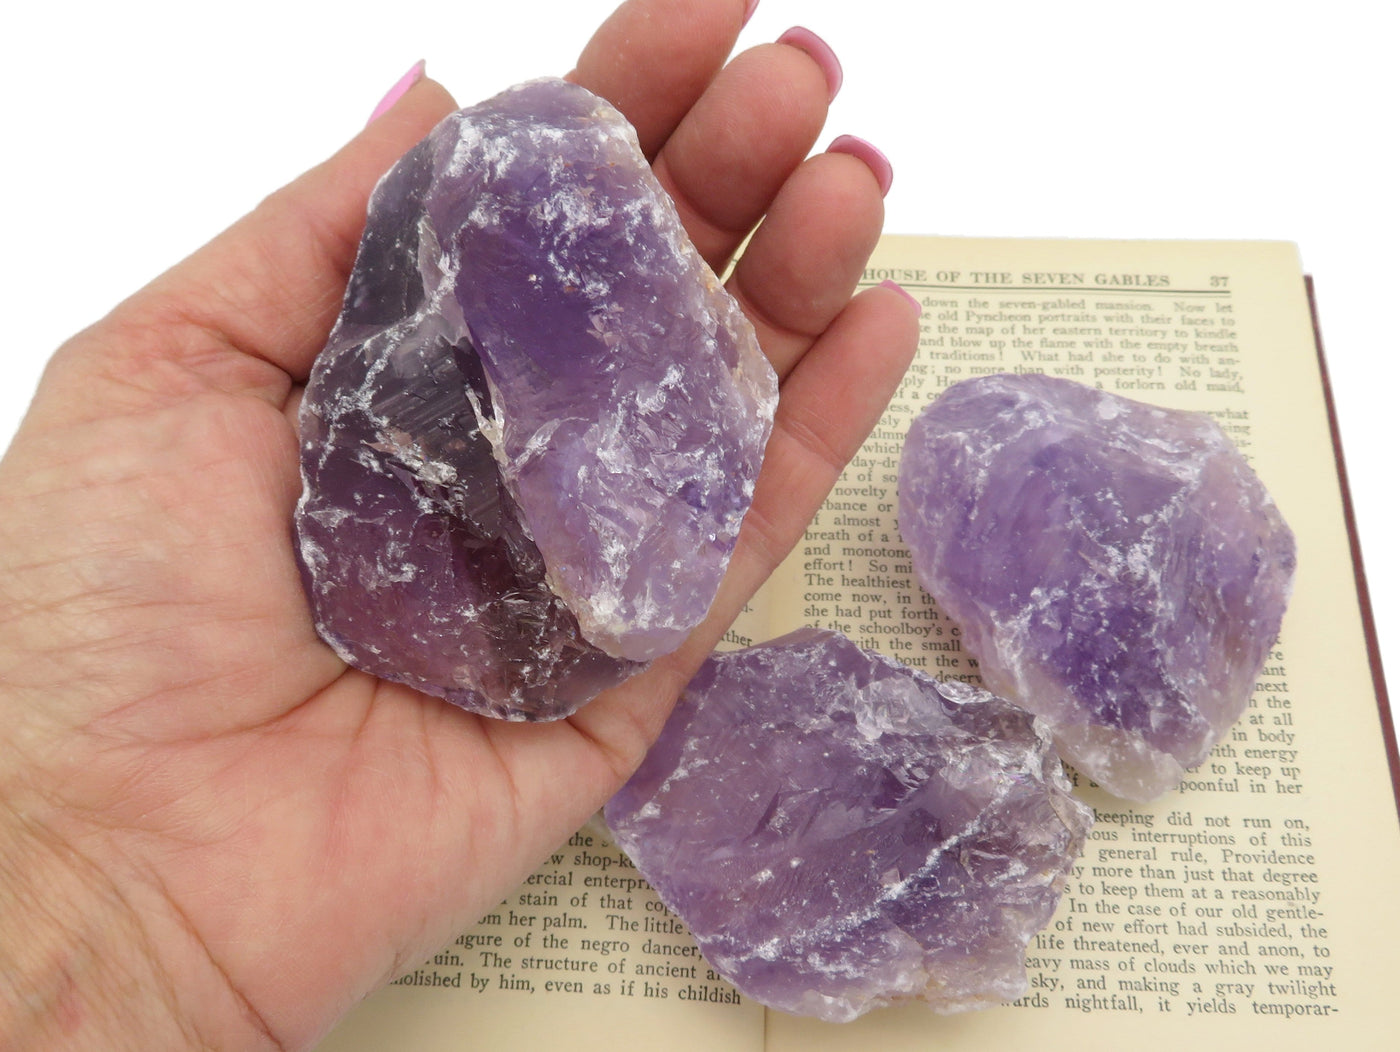 Natural Raw Amethyst Stone being held for size reference.